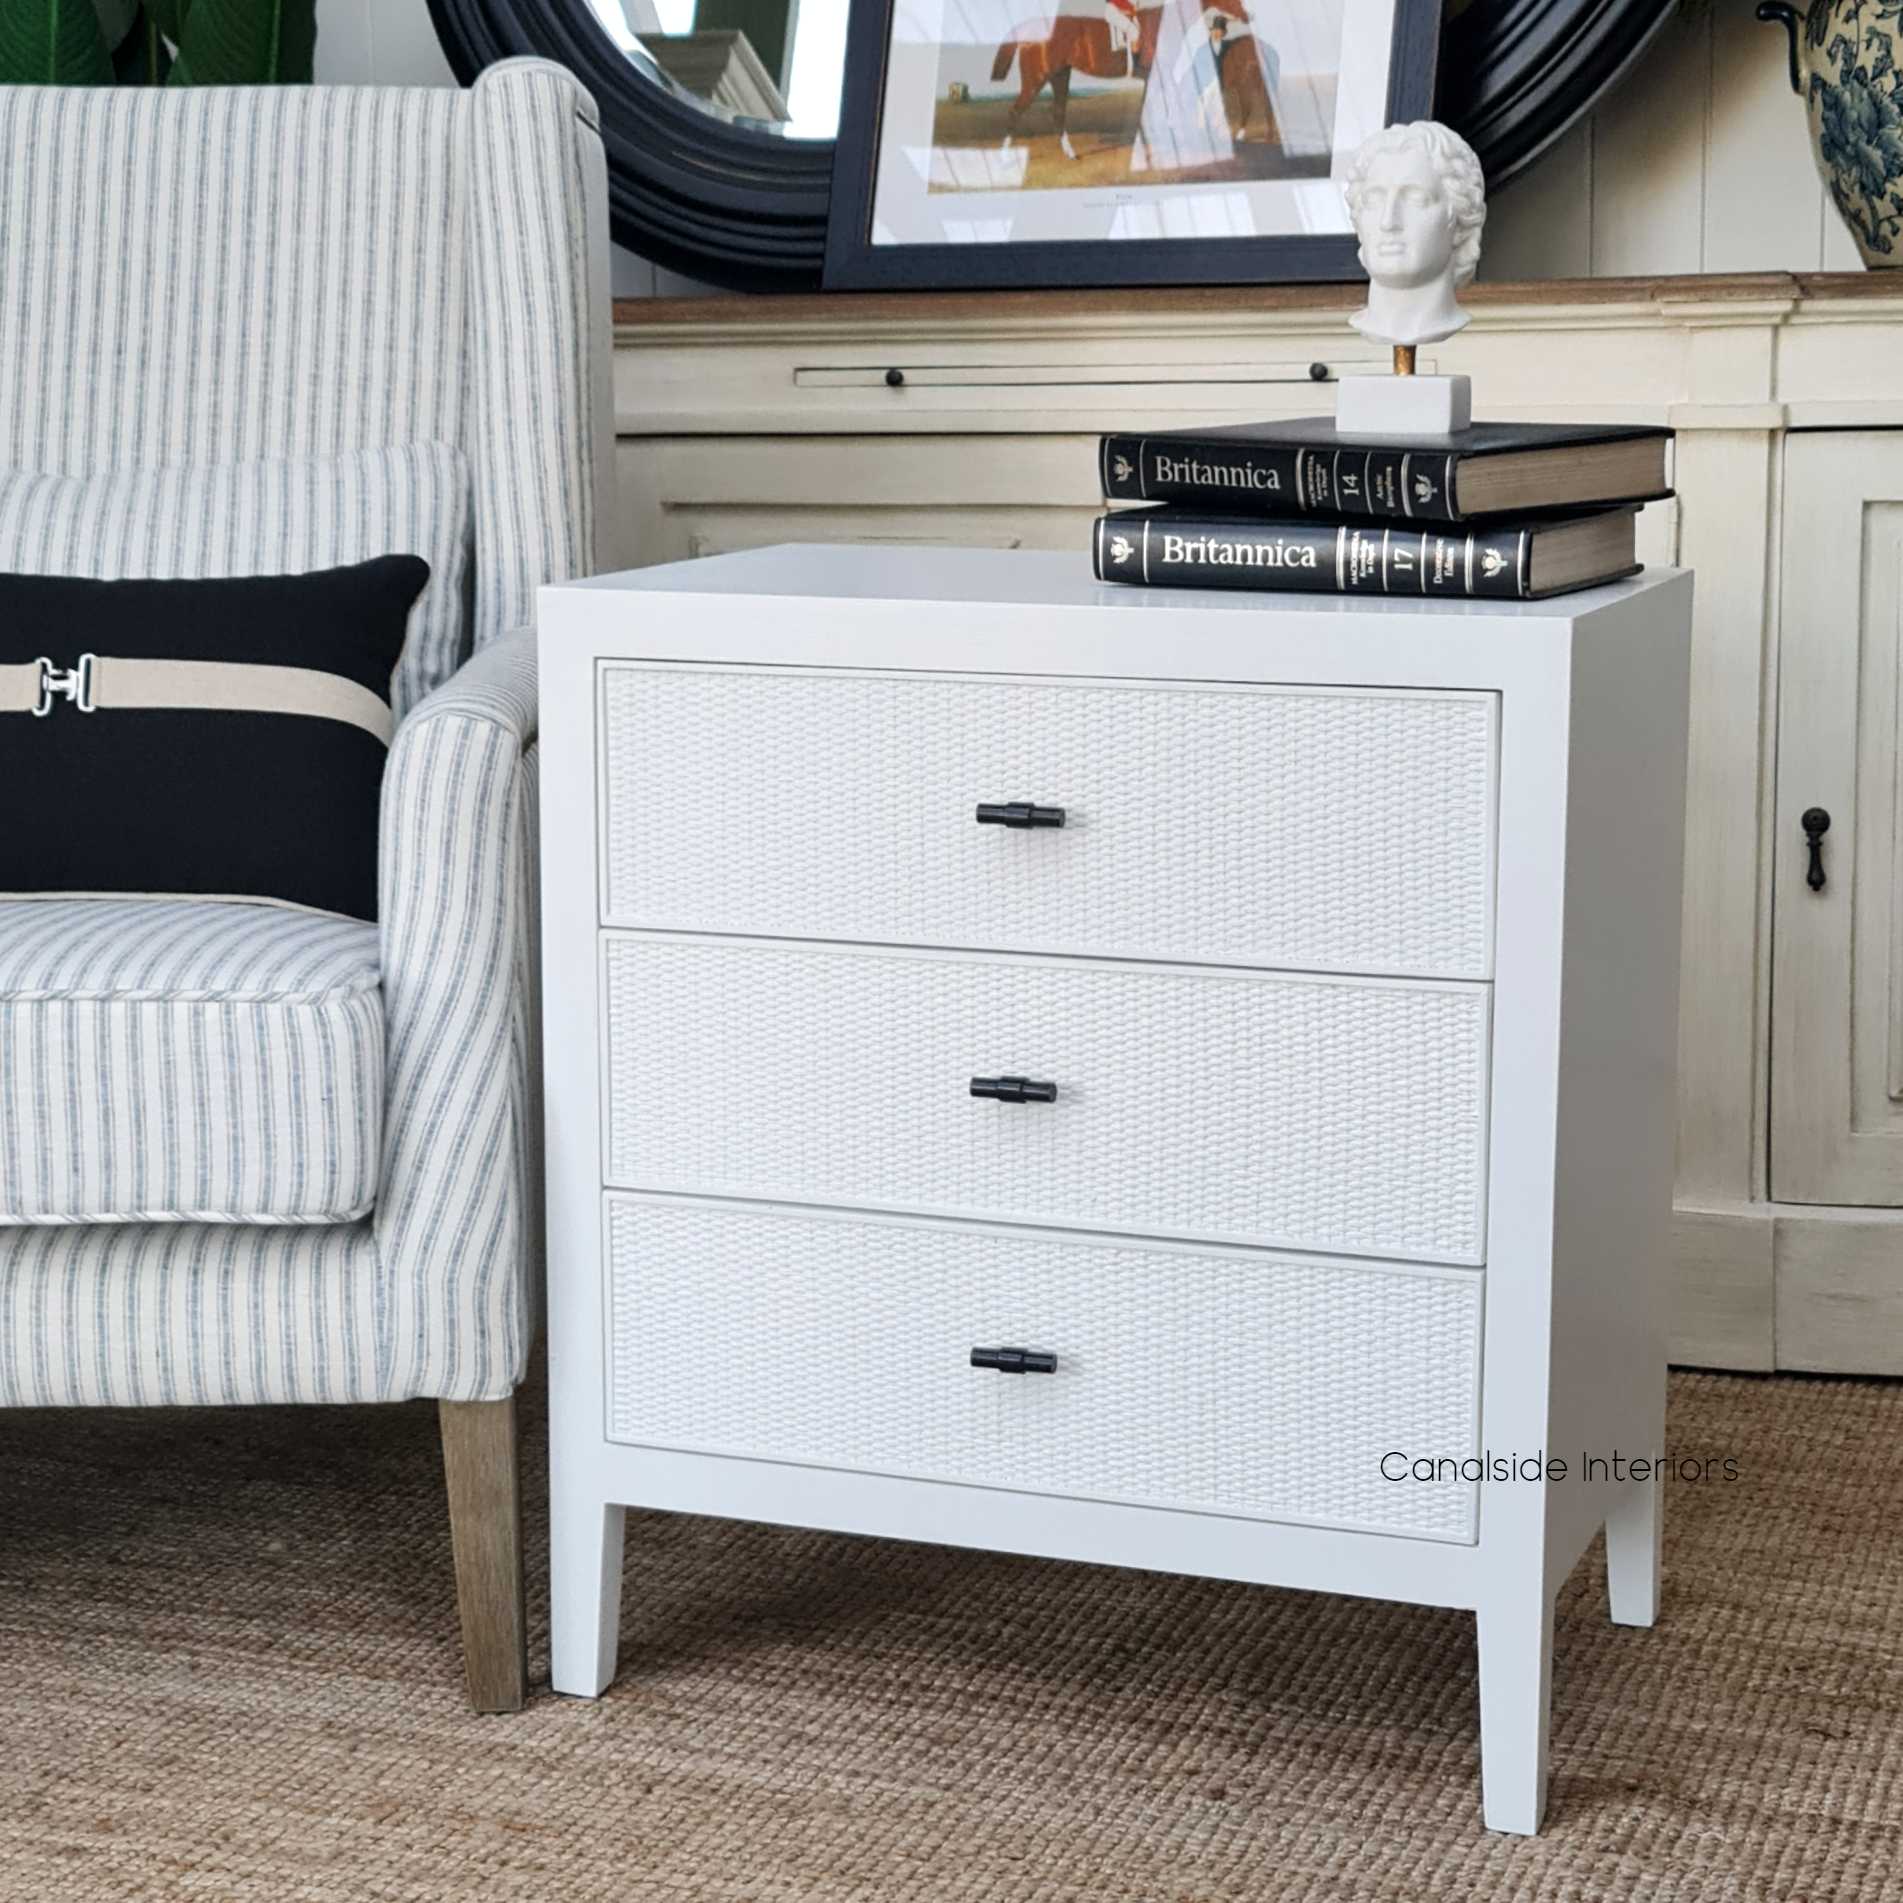 Claremont Rattan 3 Drawer Bedside Side Table  White  BEDROOM, HAMPTONS Style, PLANTATION Style, TABLES Side Tables, LIVING Side Tables, BEDROOM Bedsides, nightstand